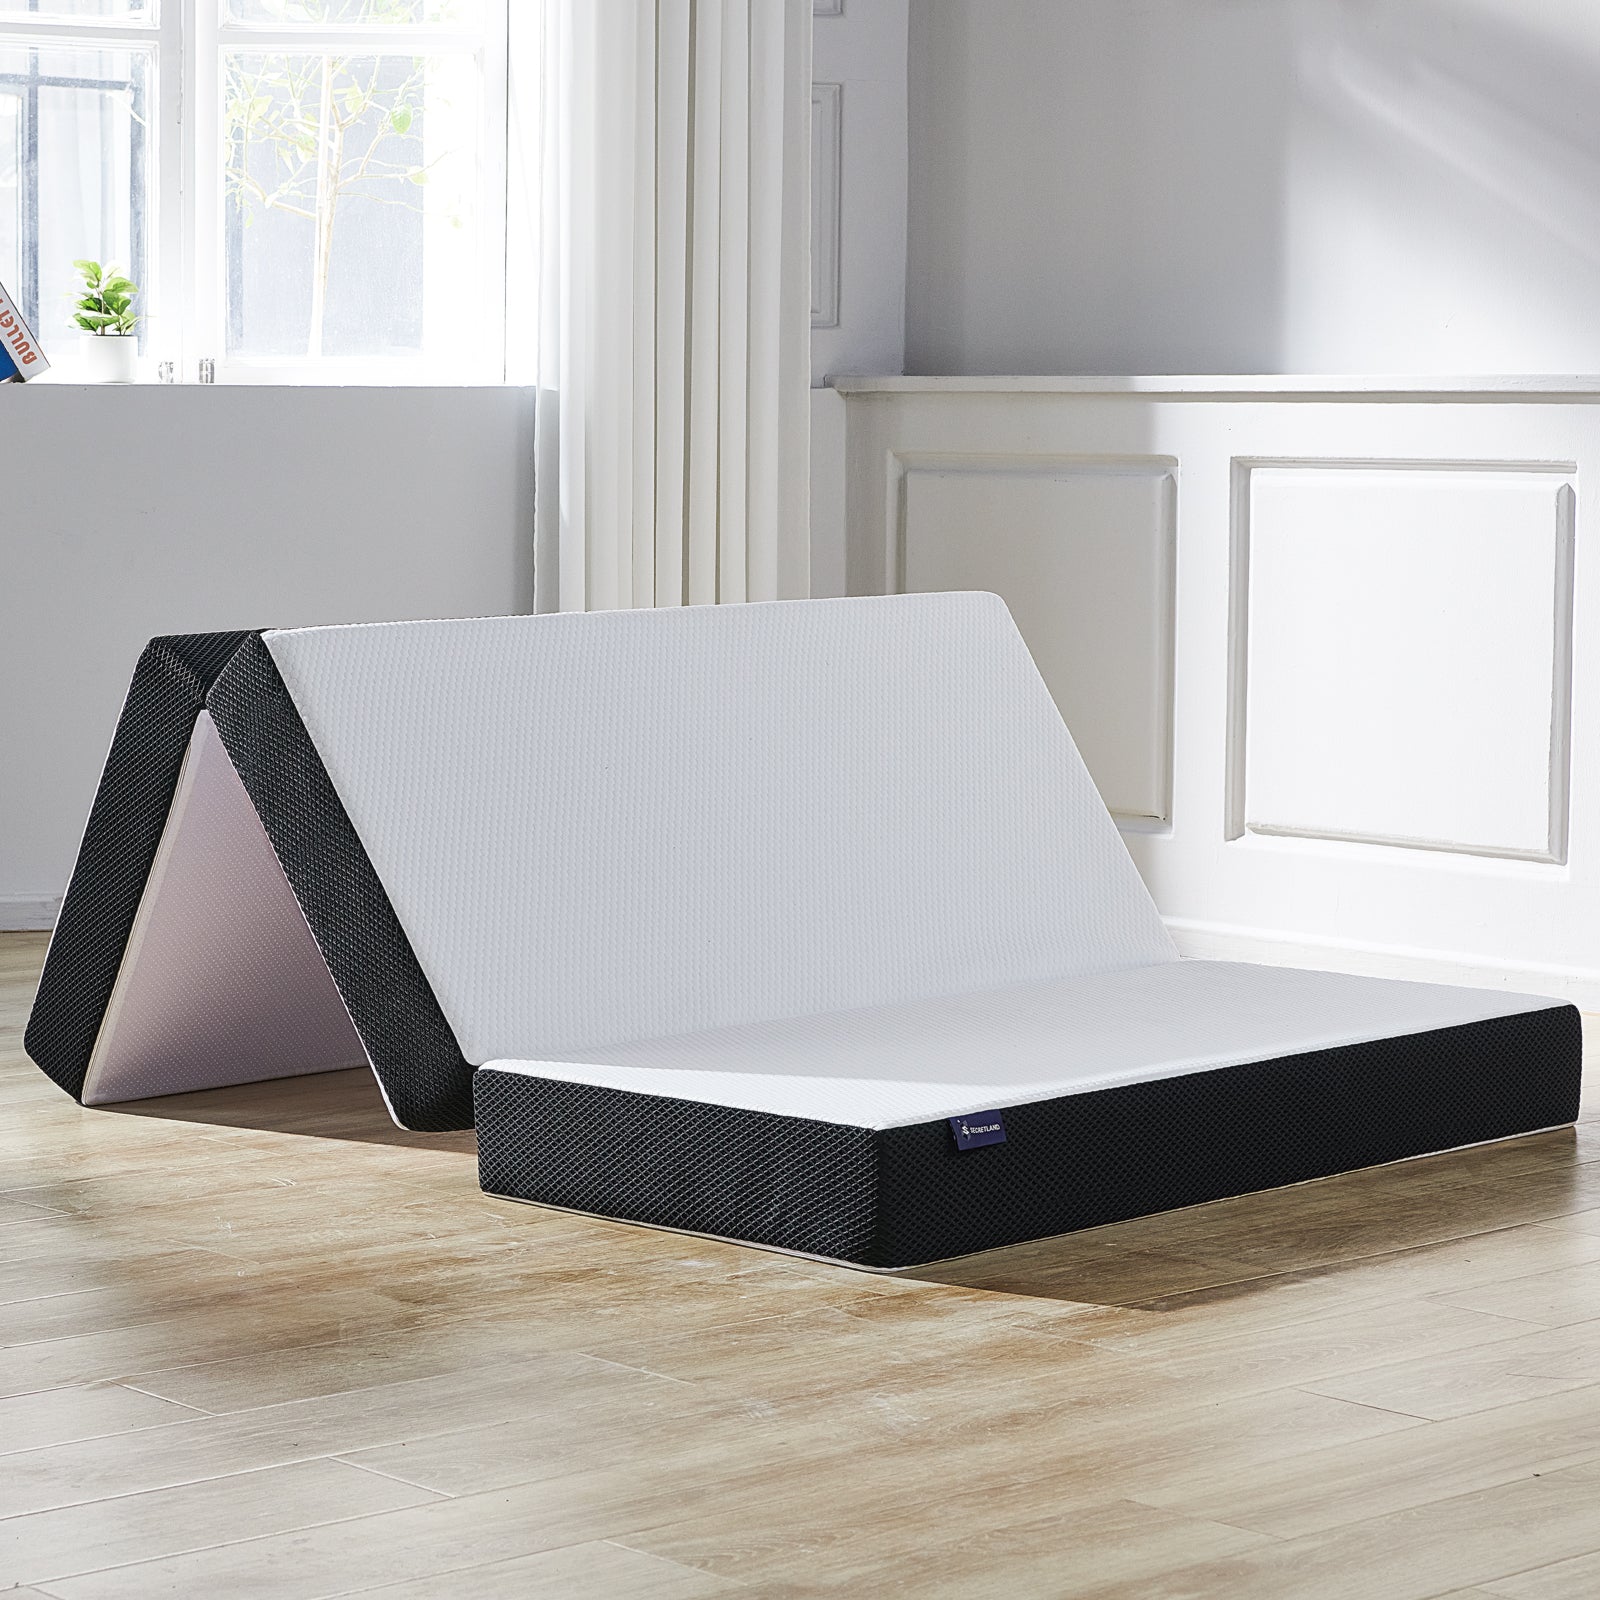 Cushy Form Floor Mattress - Portable Tri-Folding Bed for Travel, Camping 